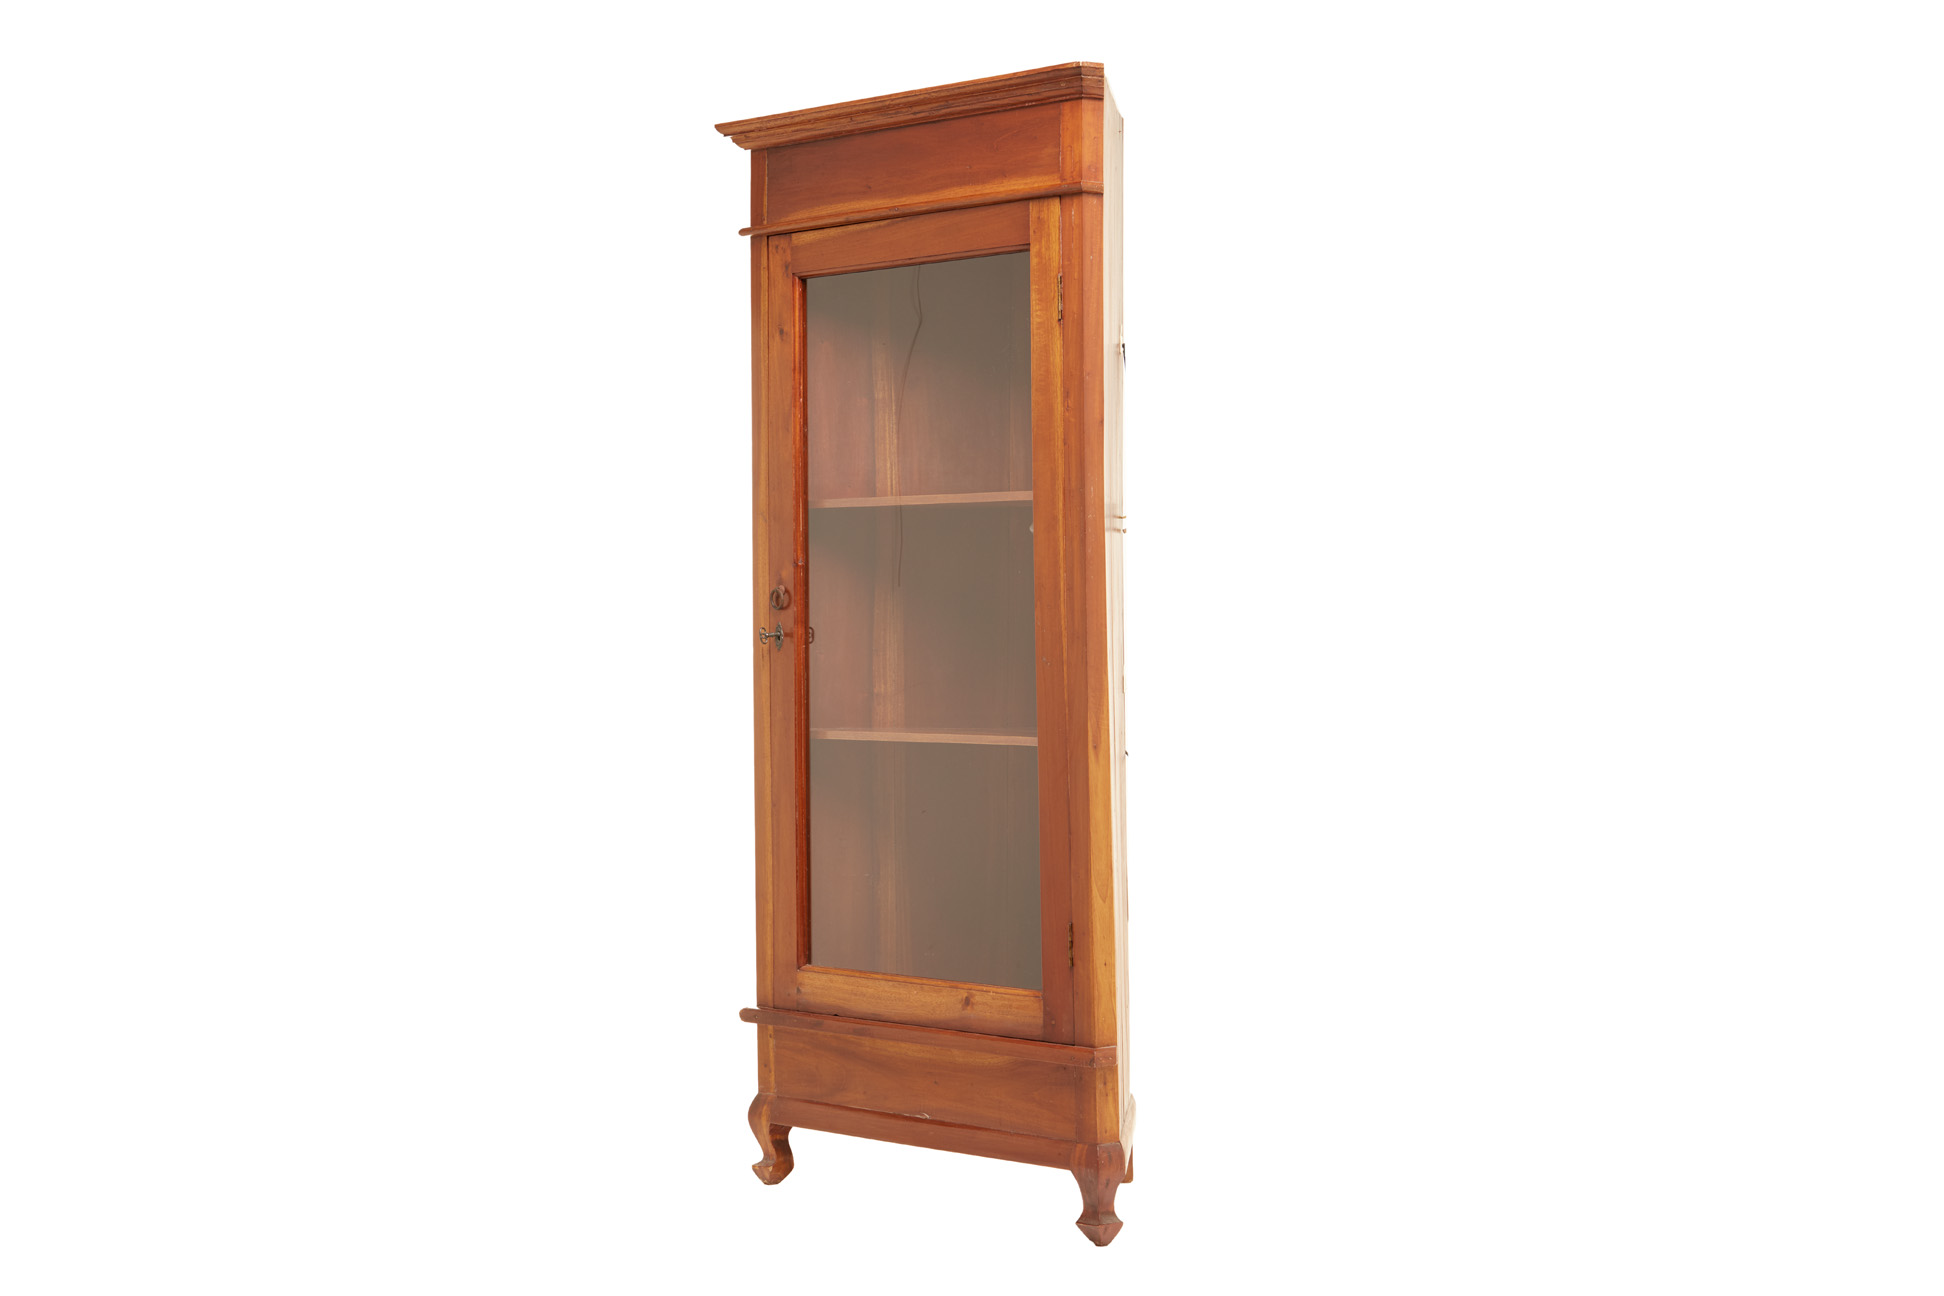 A CORNER WOODEN DISPLAY CABINET - Image 2 of 3